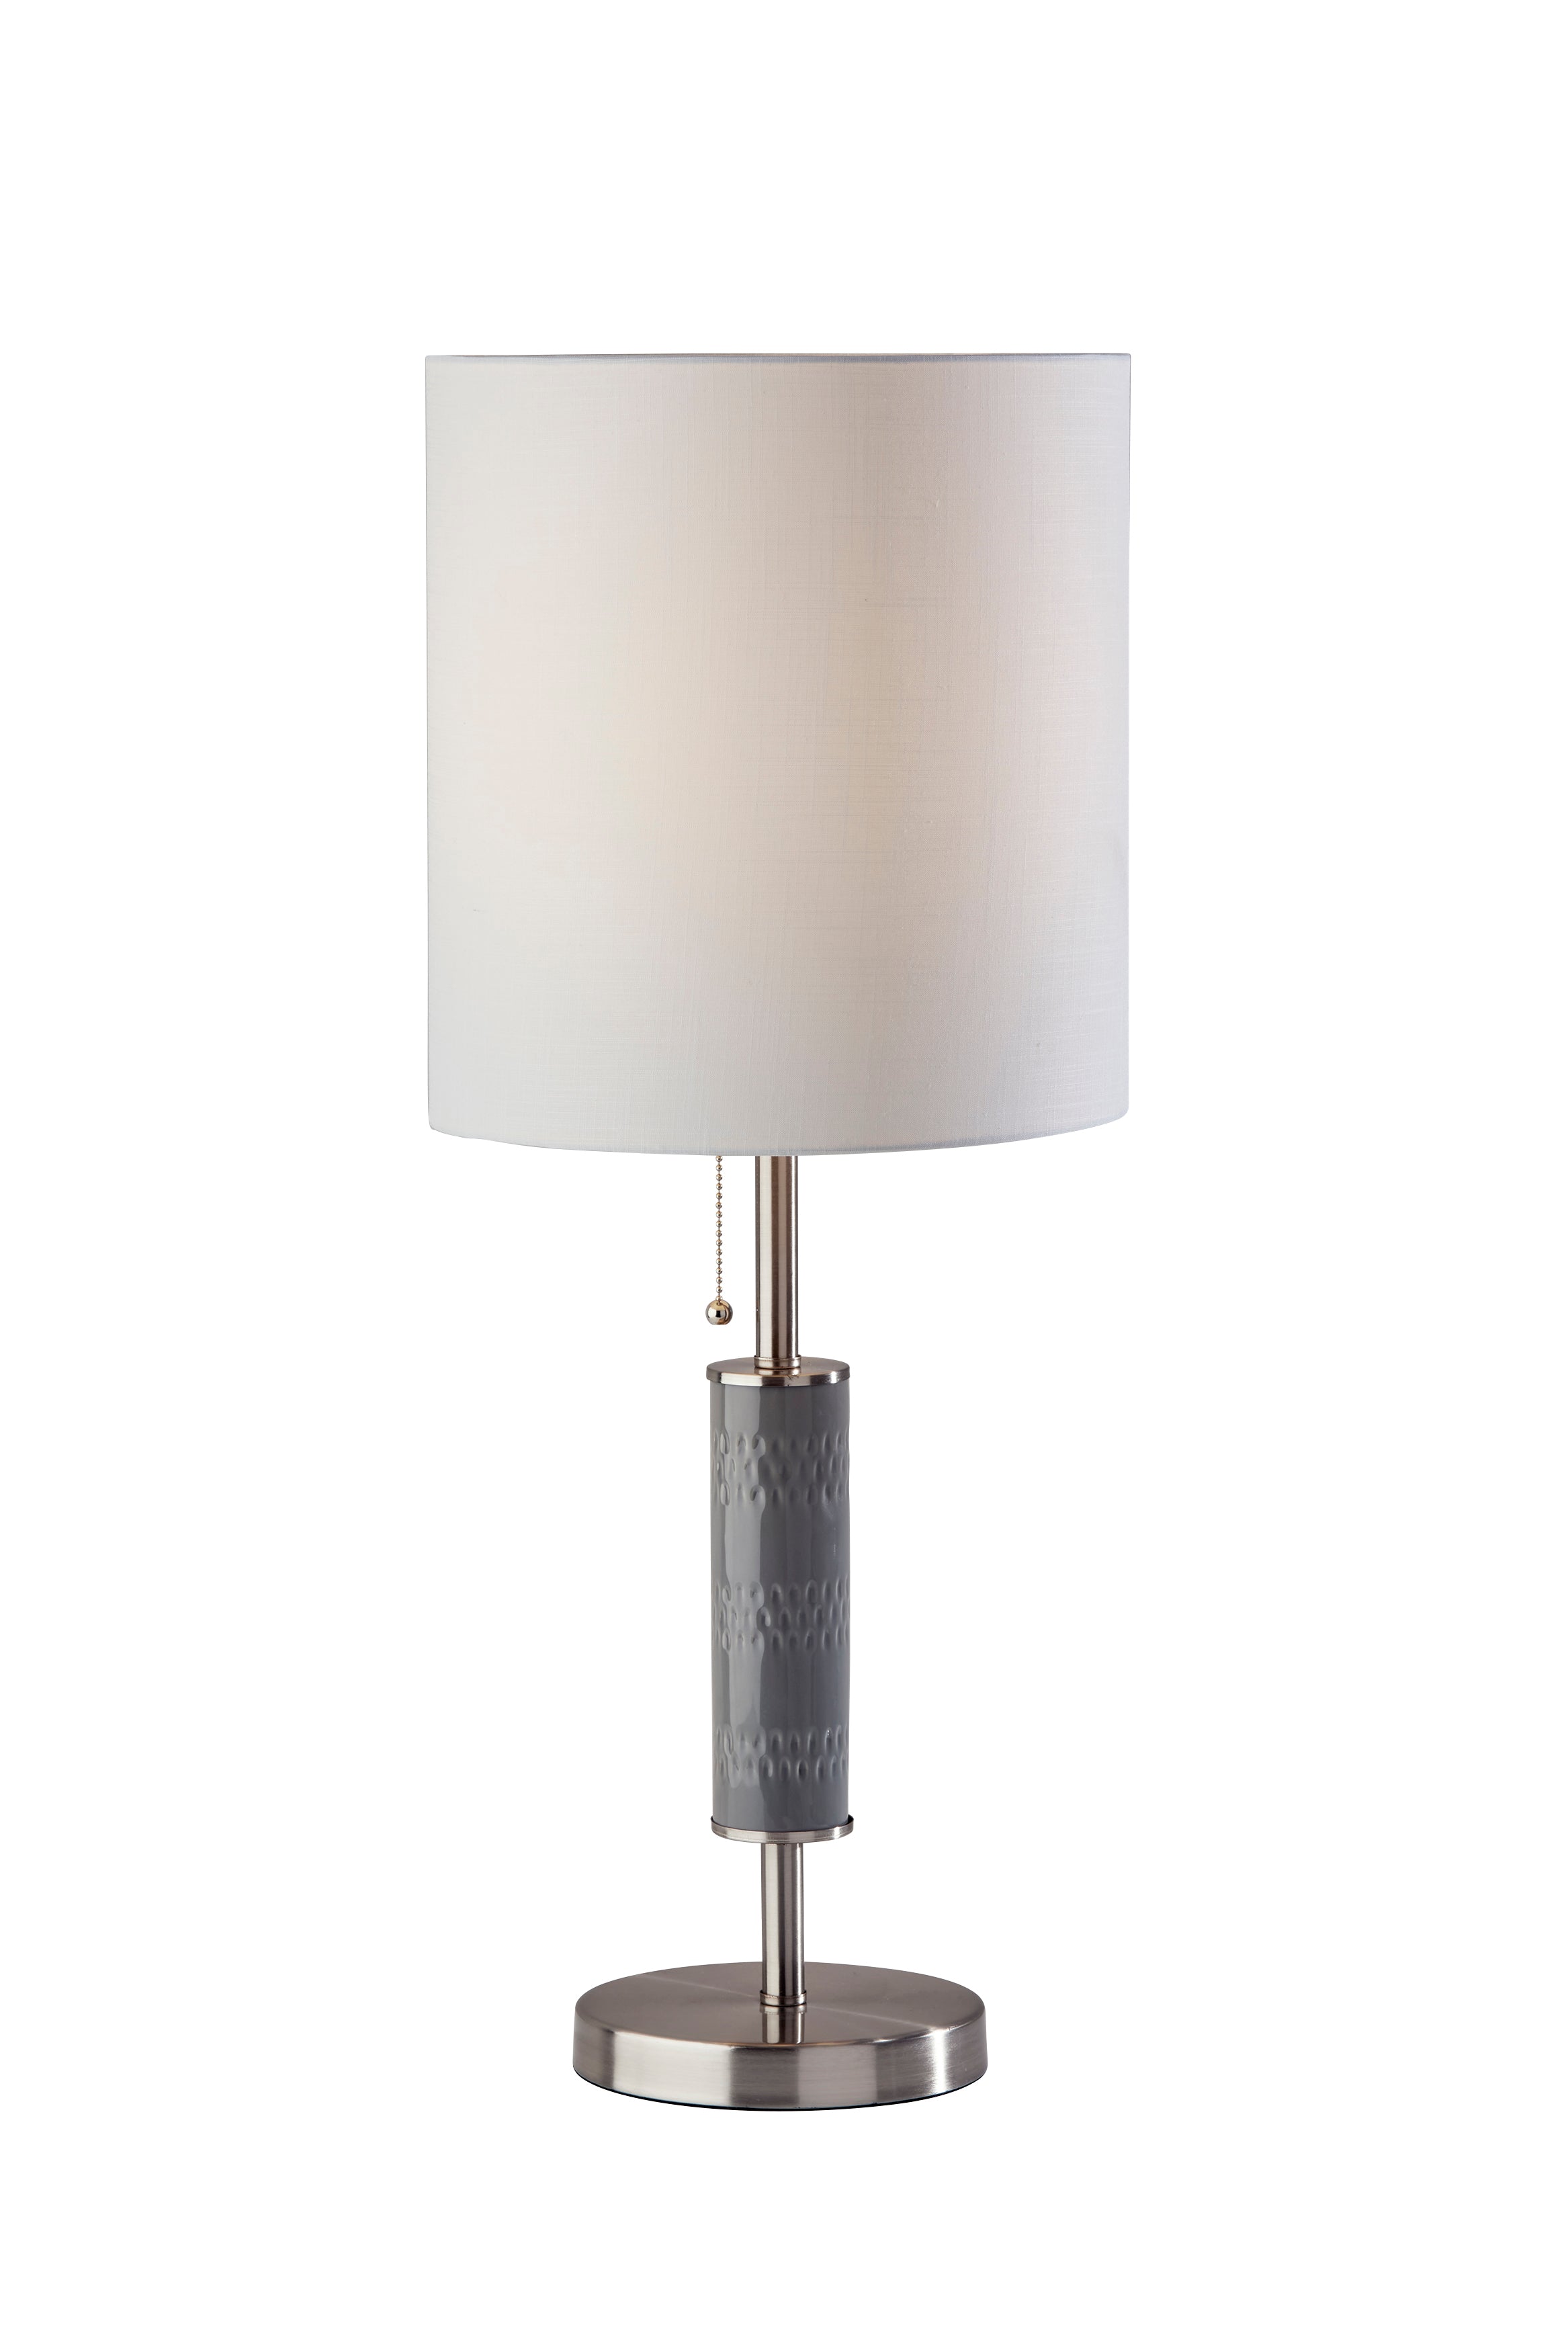 VANESSA Table lamp Stainless steel - 1595-22 | ADESSO